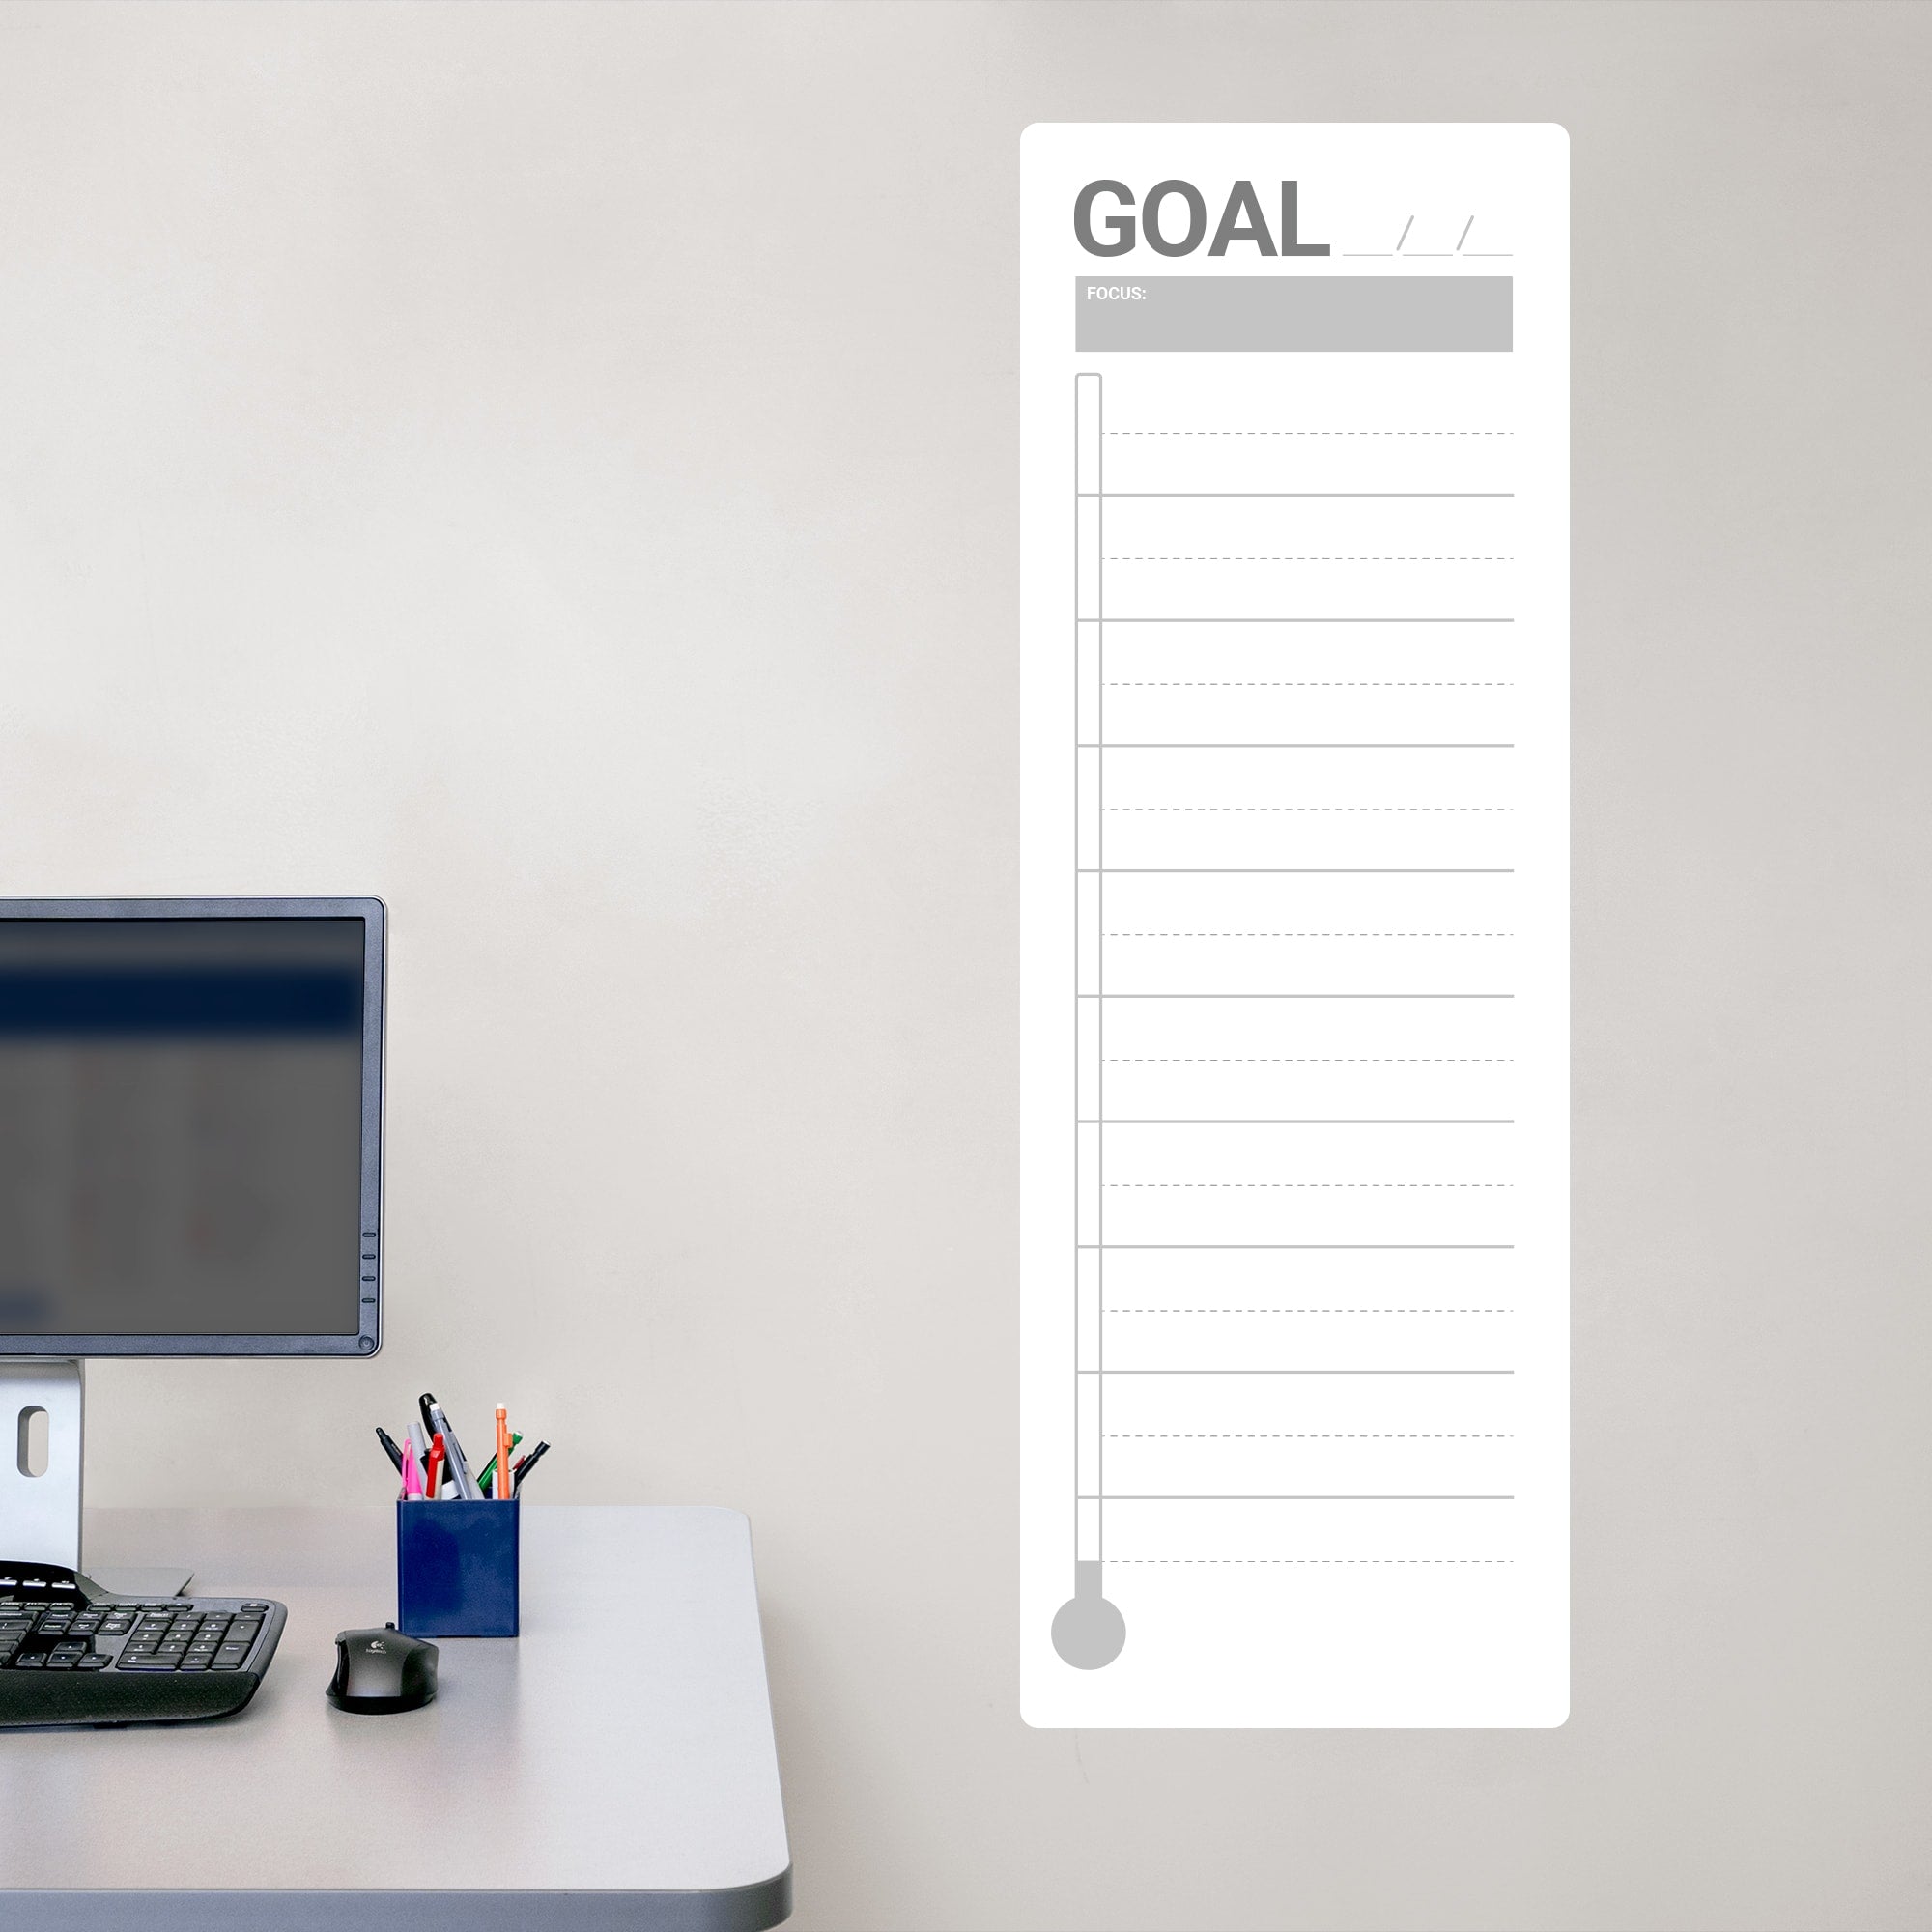 Goal Thermometer: Minamalist Design - Removable Dry Erase Vinyl Decal in Gray (42"W x 14"H) by Fathead